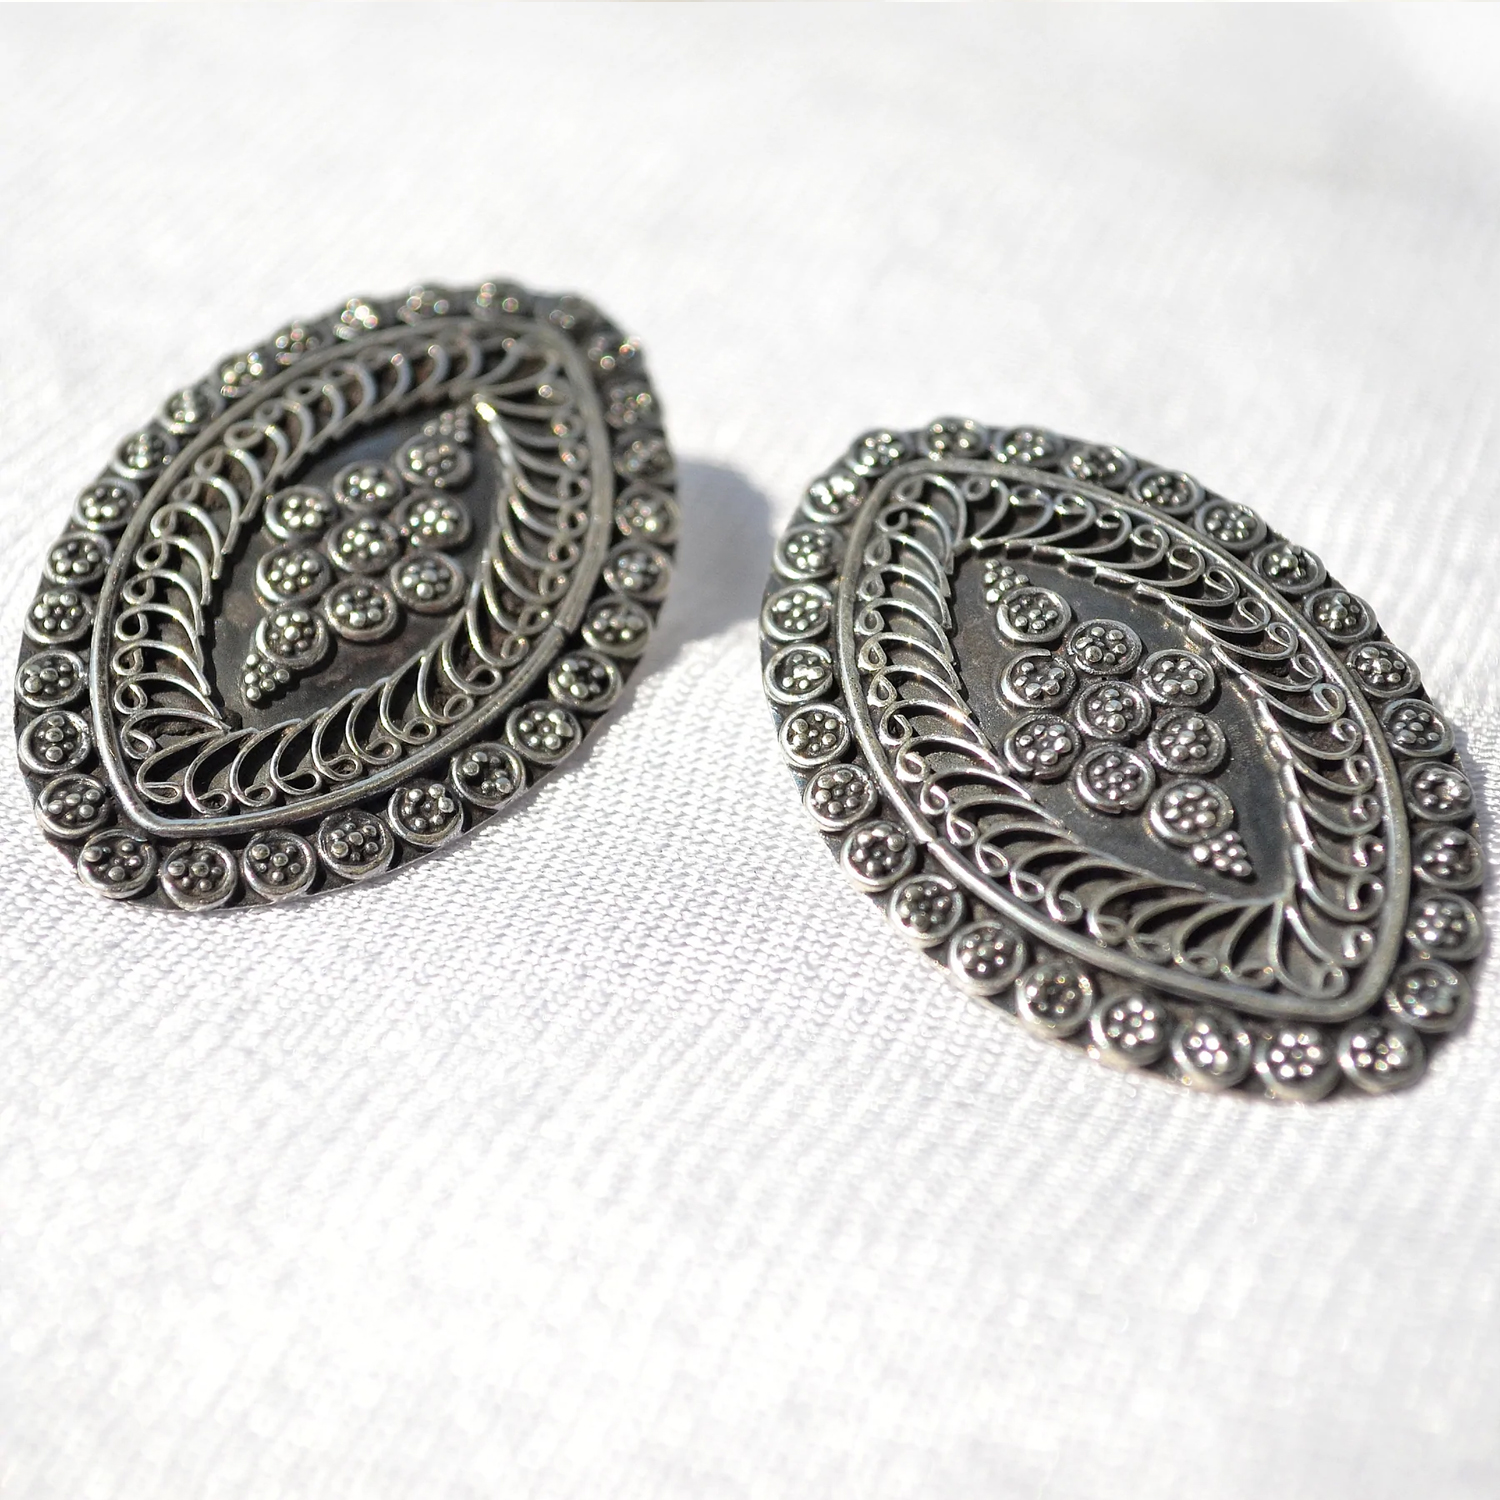 Oval Shaped Studs With Stunning Patterns | Silver Stud Earrings ...